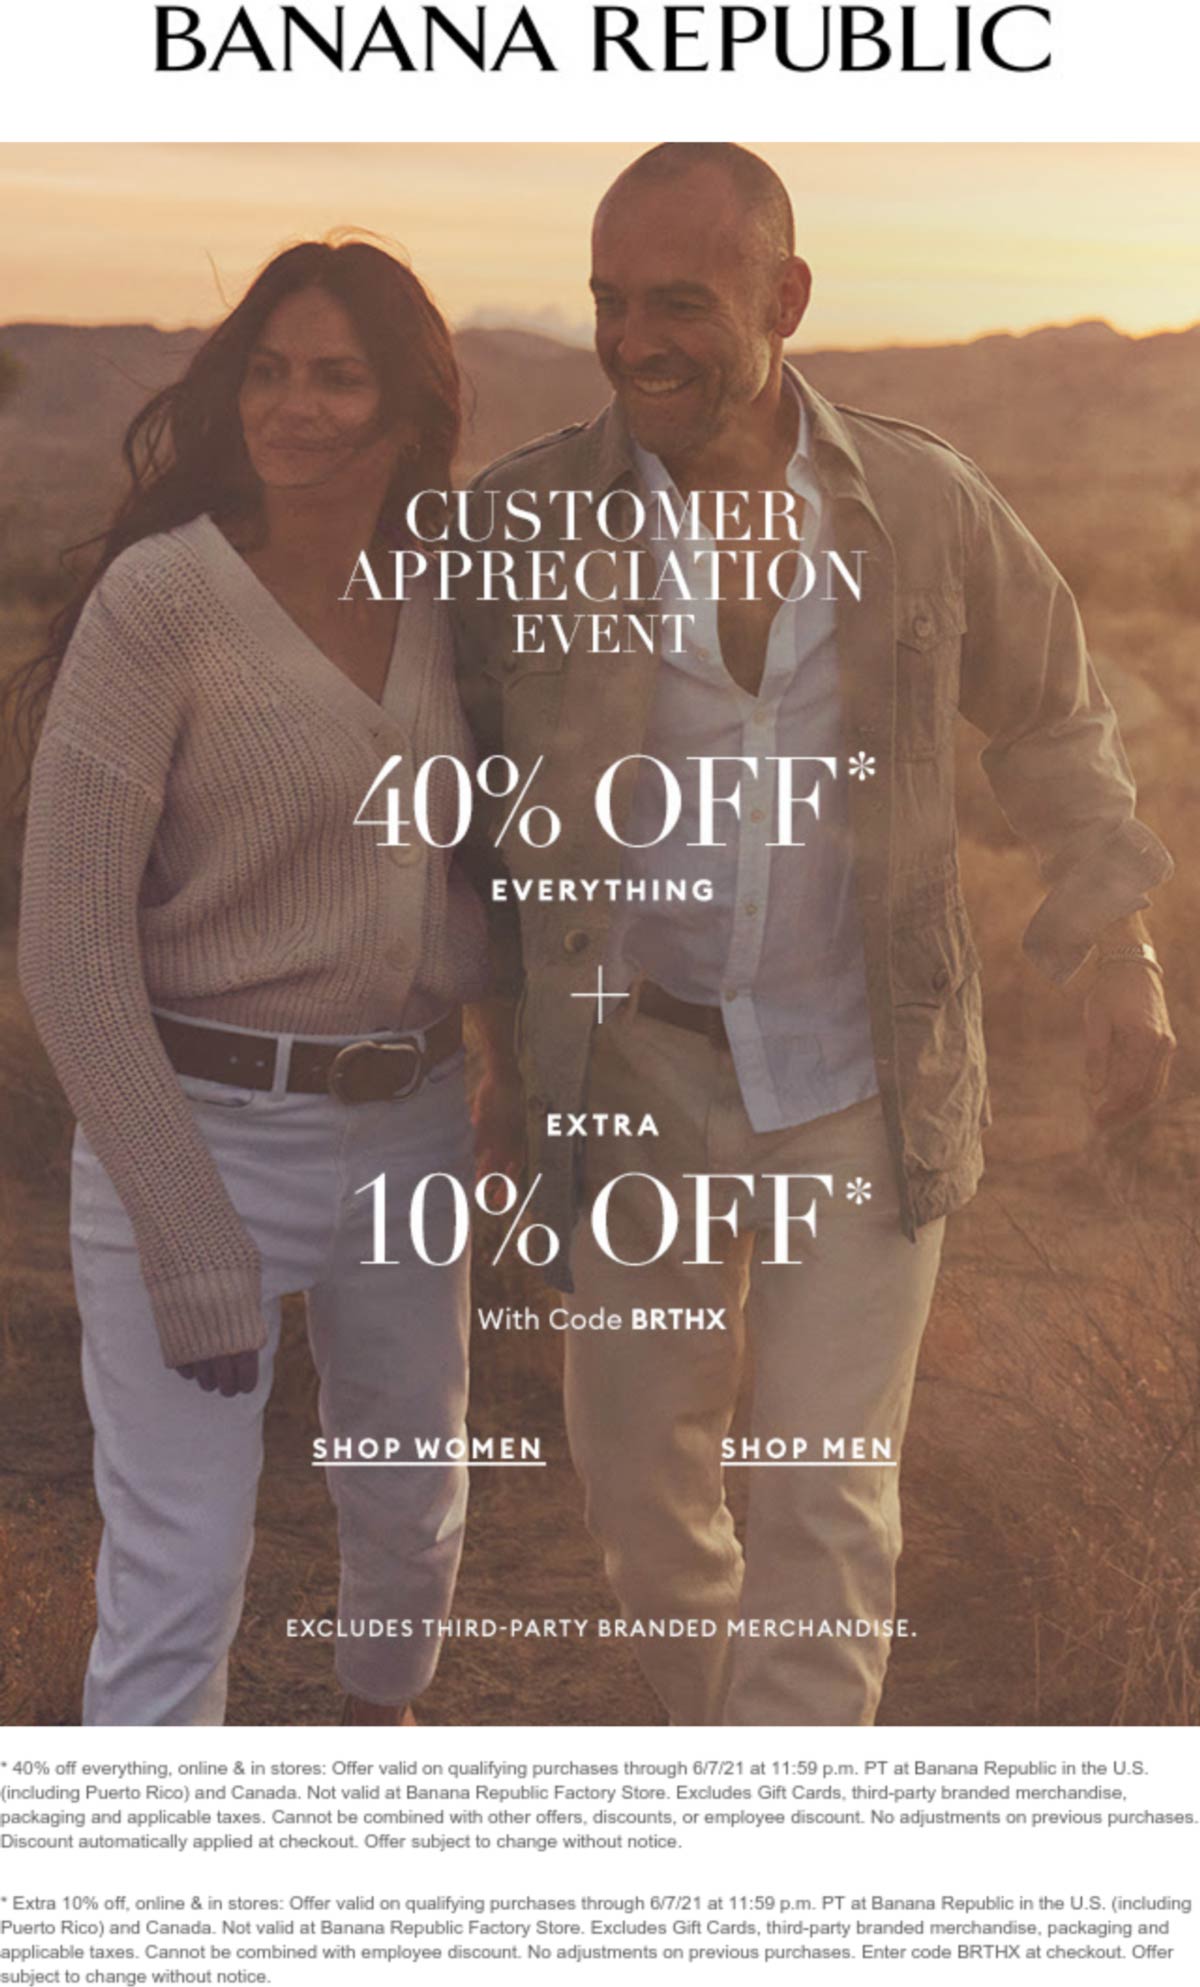 50-off-everything-at-banana-republic-or-online-via-promo-code-brthx